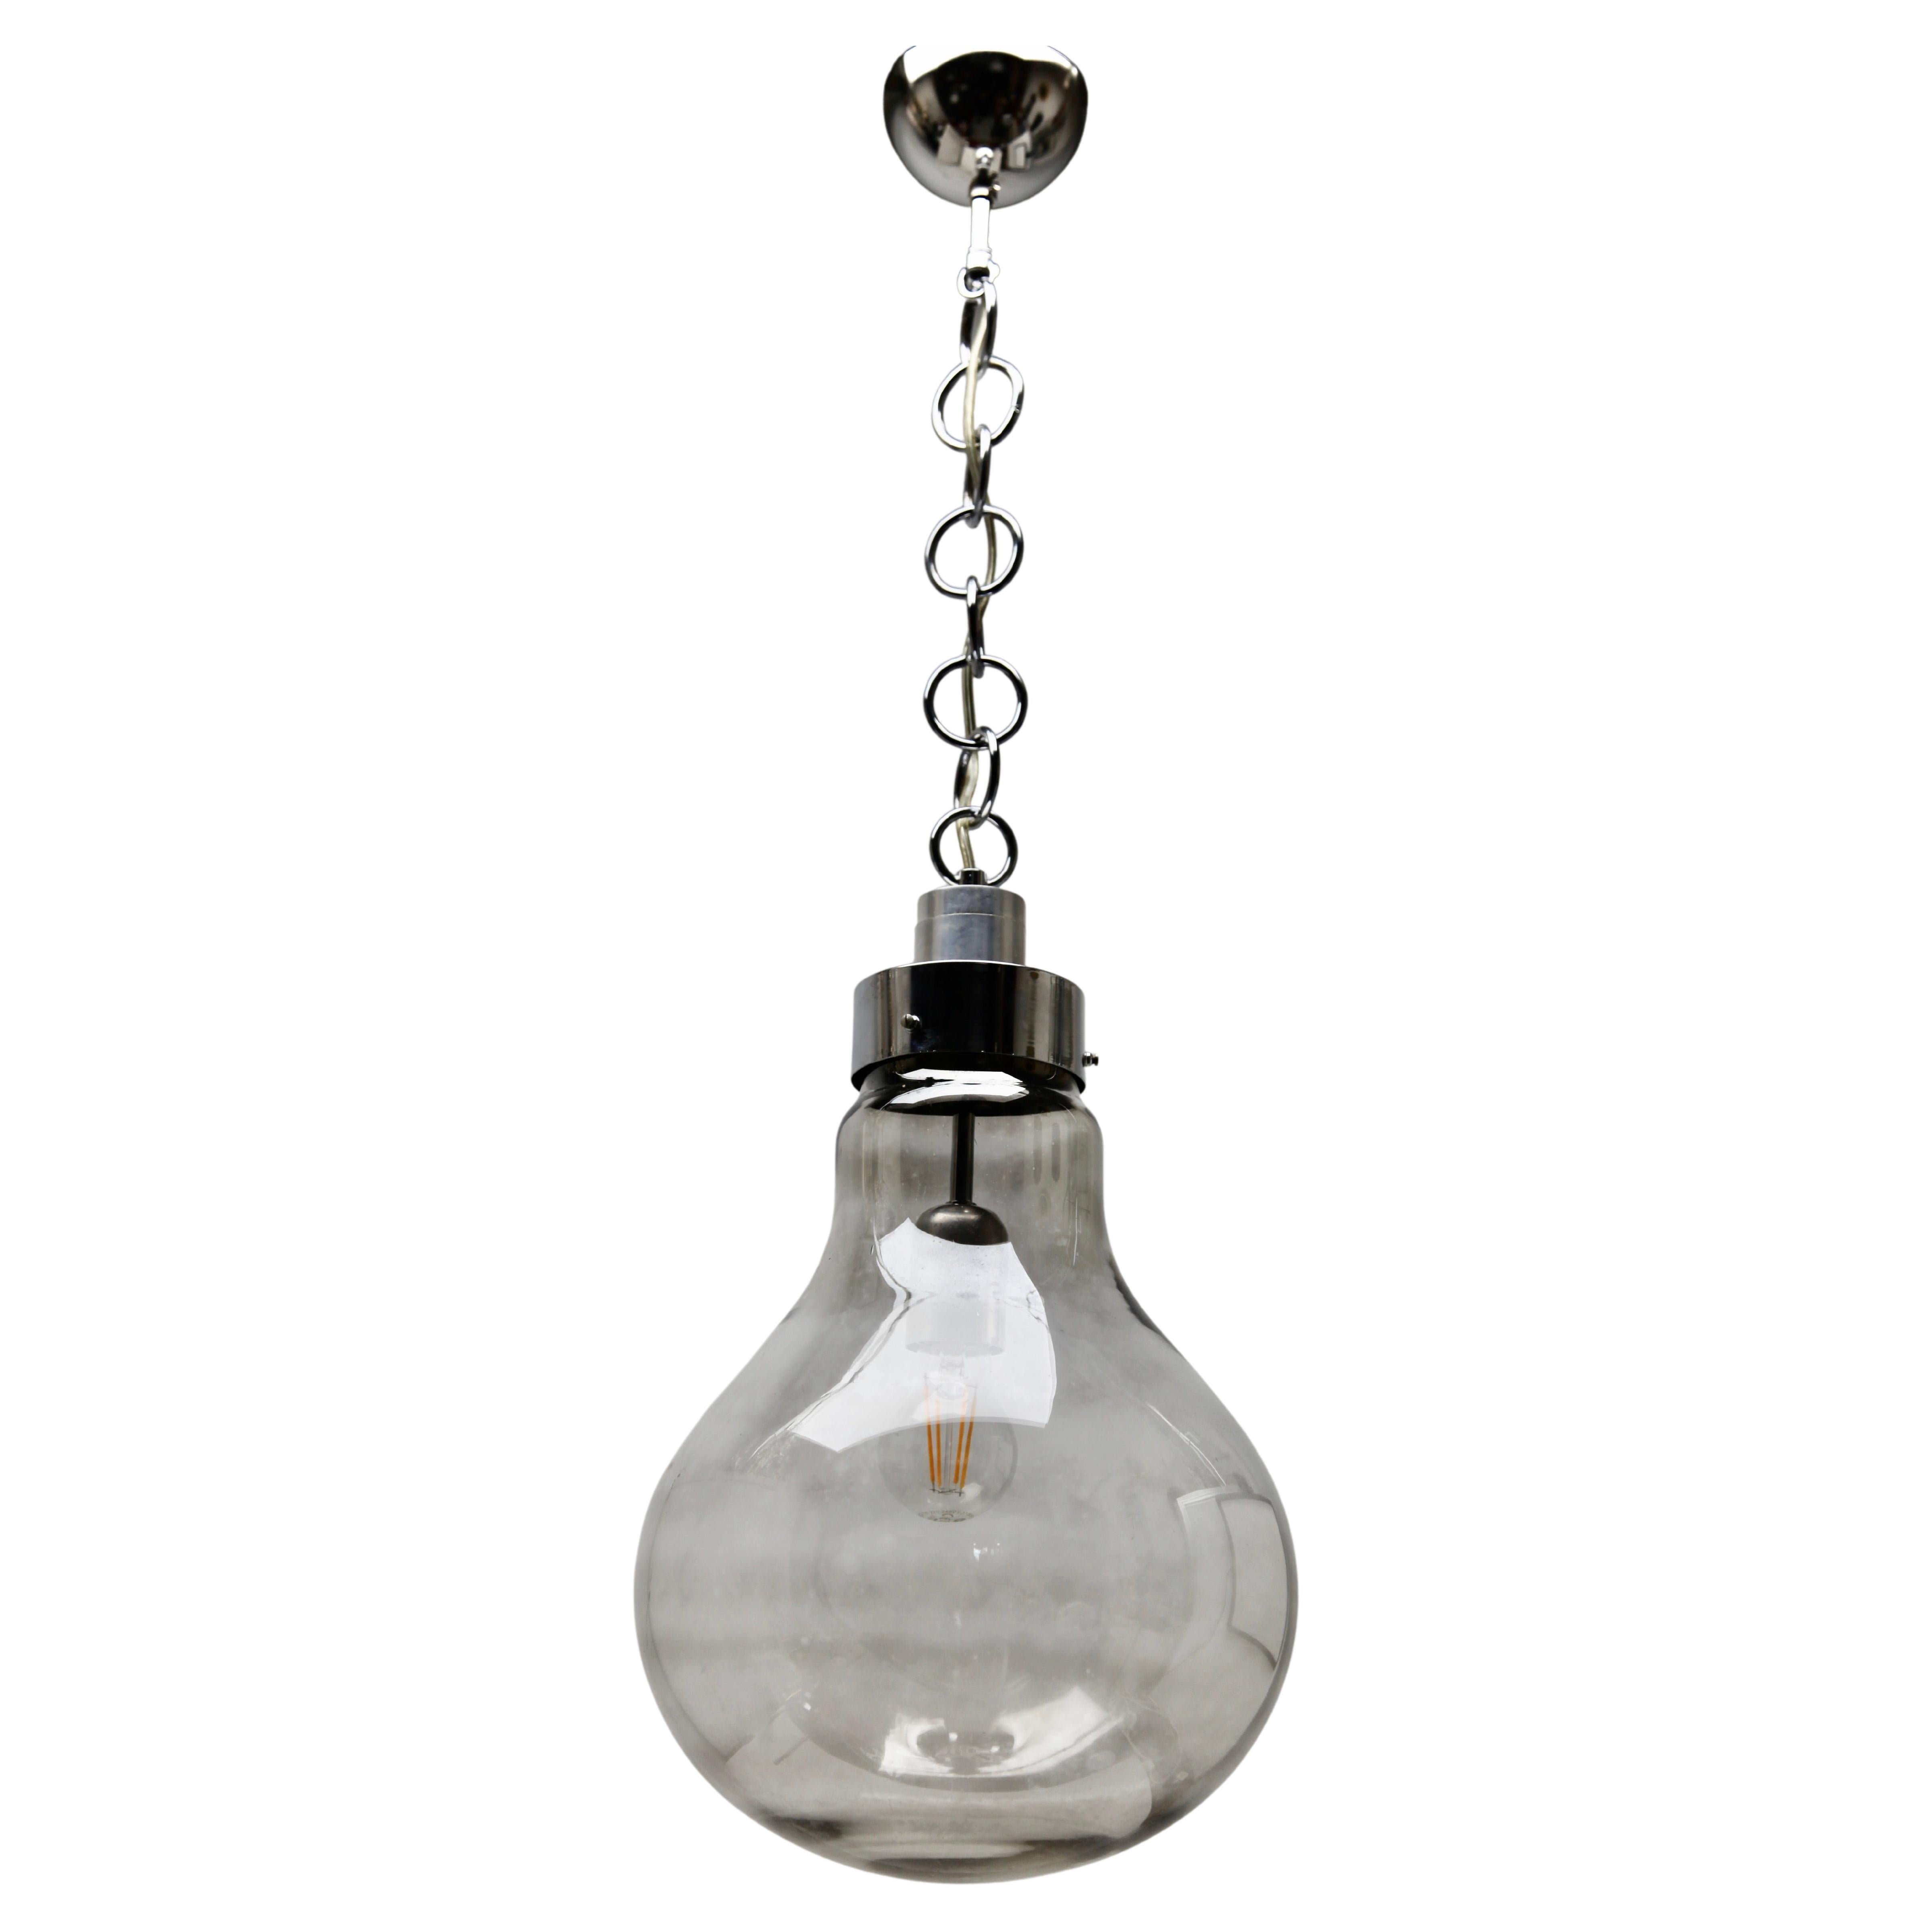 Vintage Pendant Ceiling Light in the Schape of a Big Bulb, Smoked Glass, 1960s For Sale